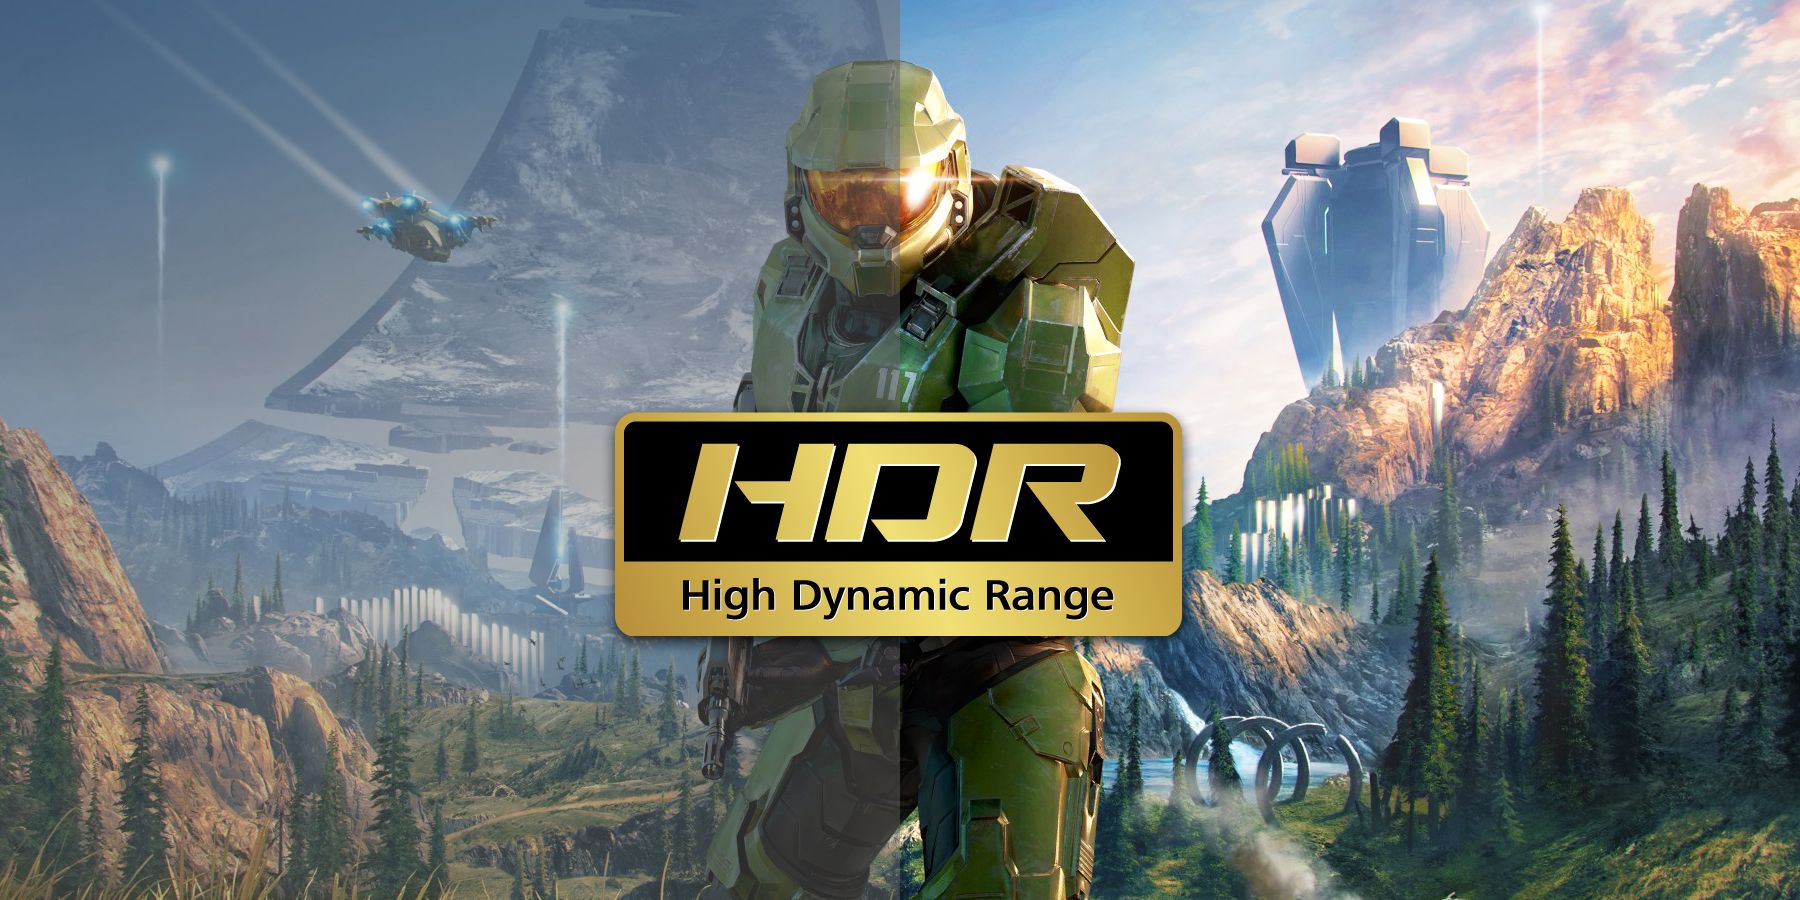 What Is HDR? Does It Make That Big a Difference for Gaming?